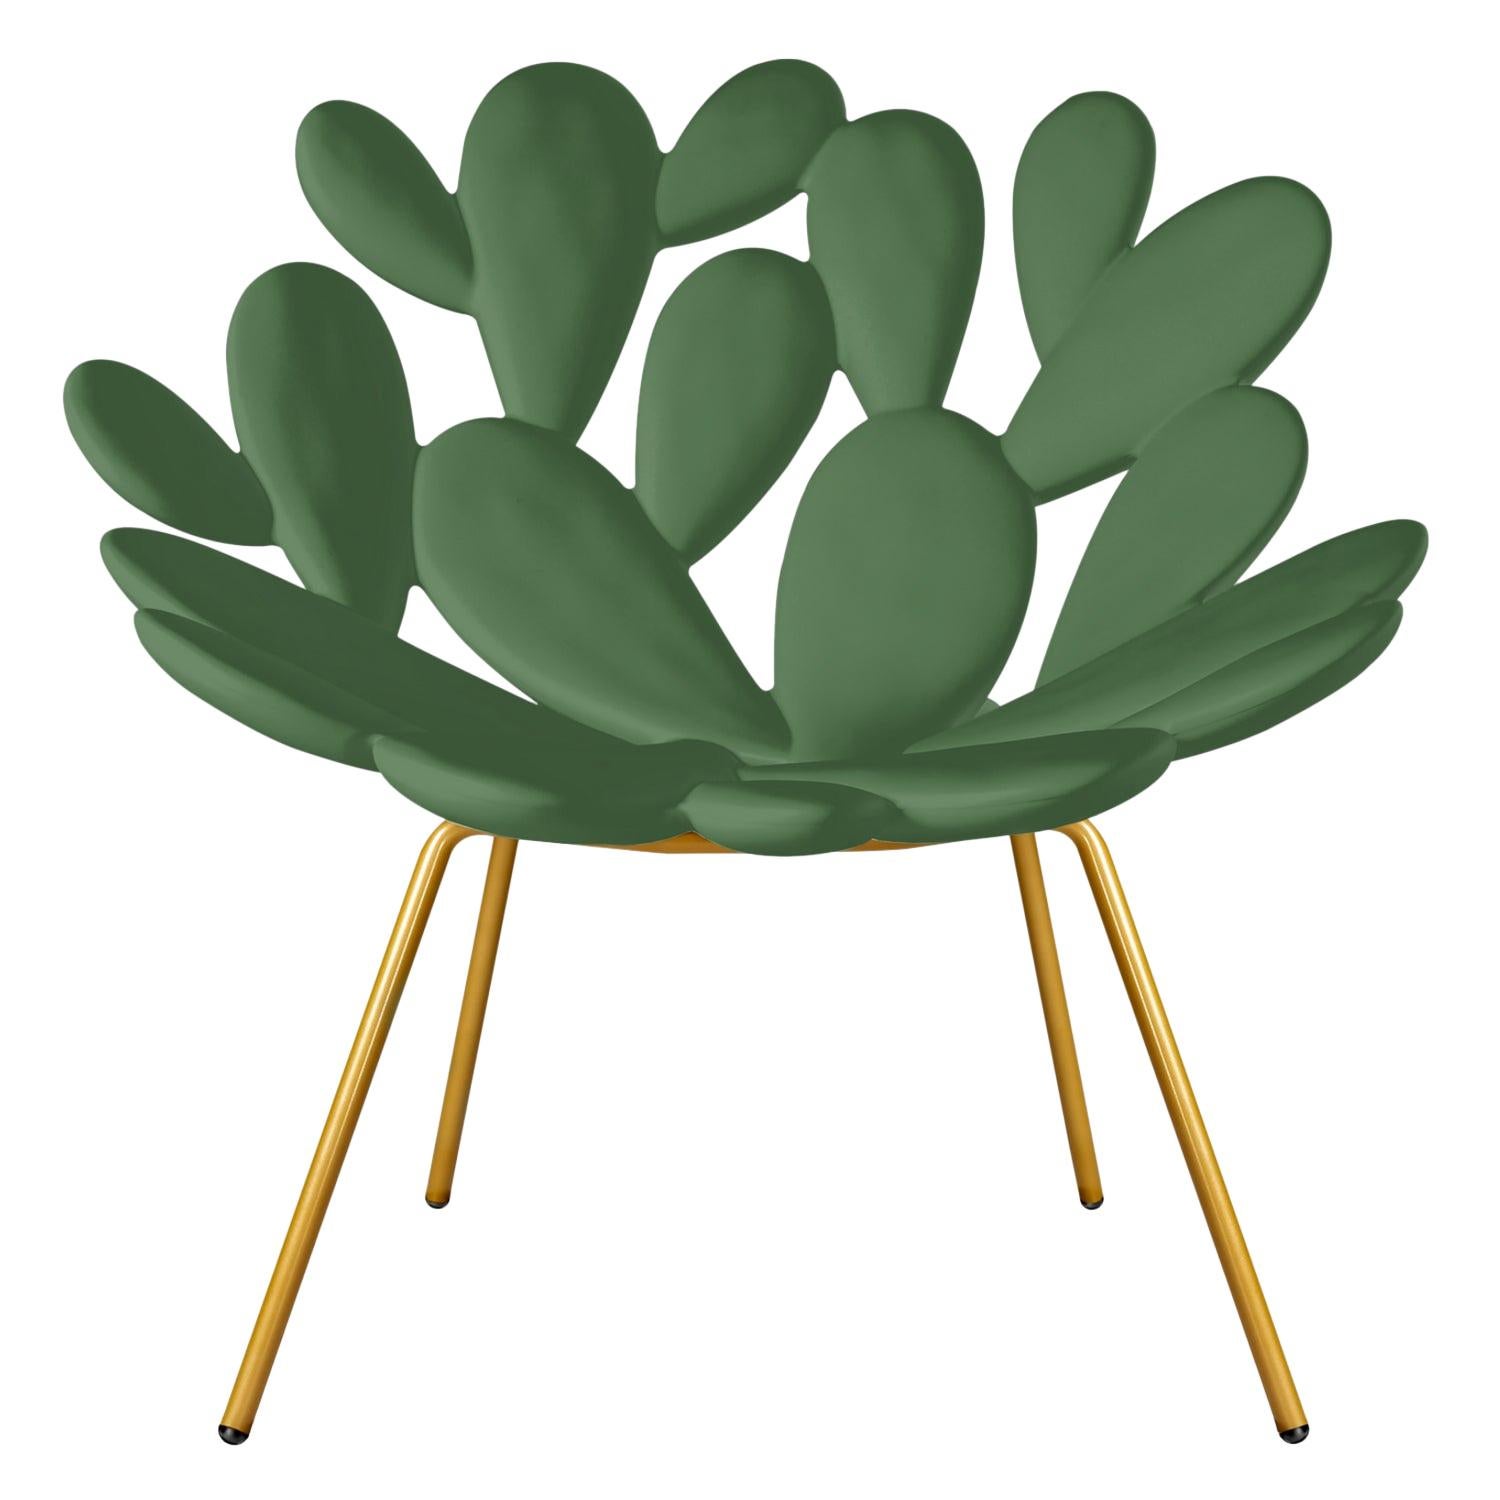 In Stock in Los Angeles, Green Indoor / Outdoor Cactus Chair, Made in Italy